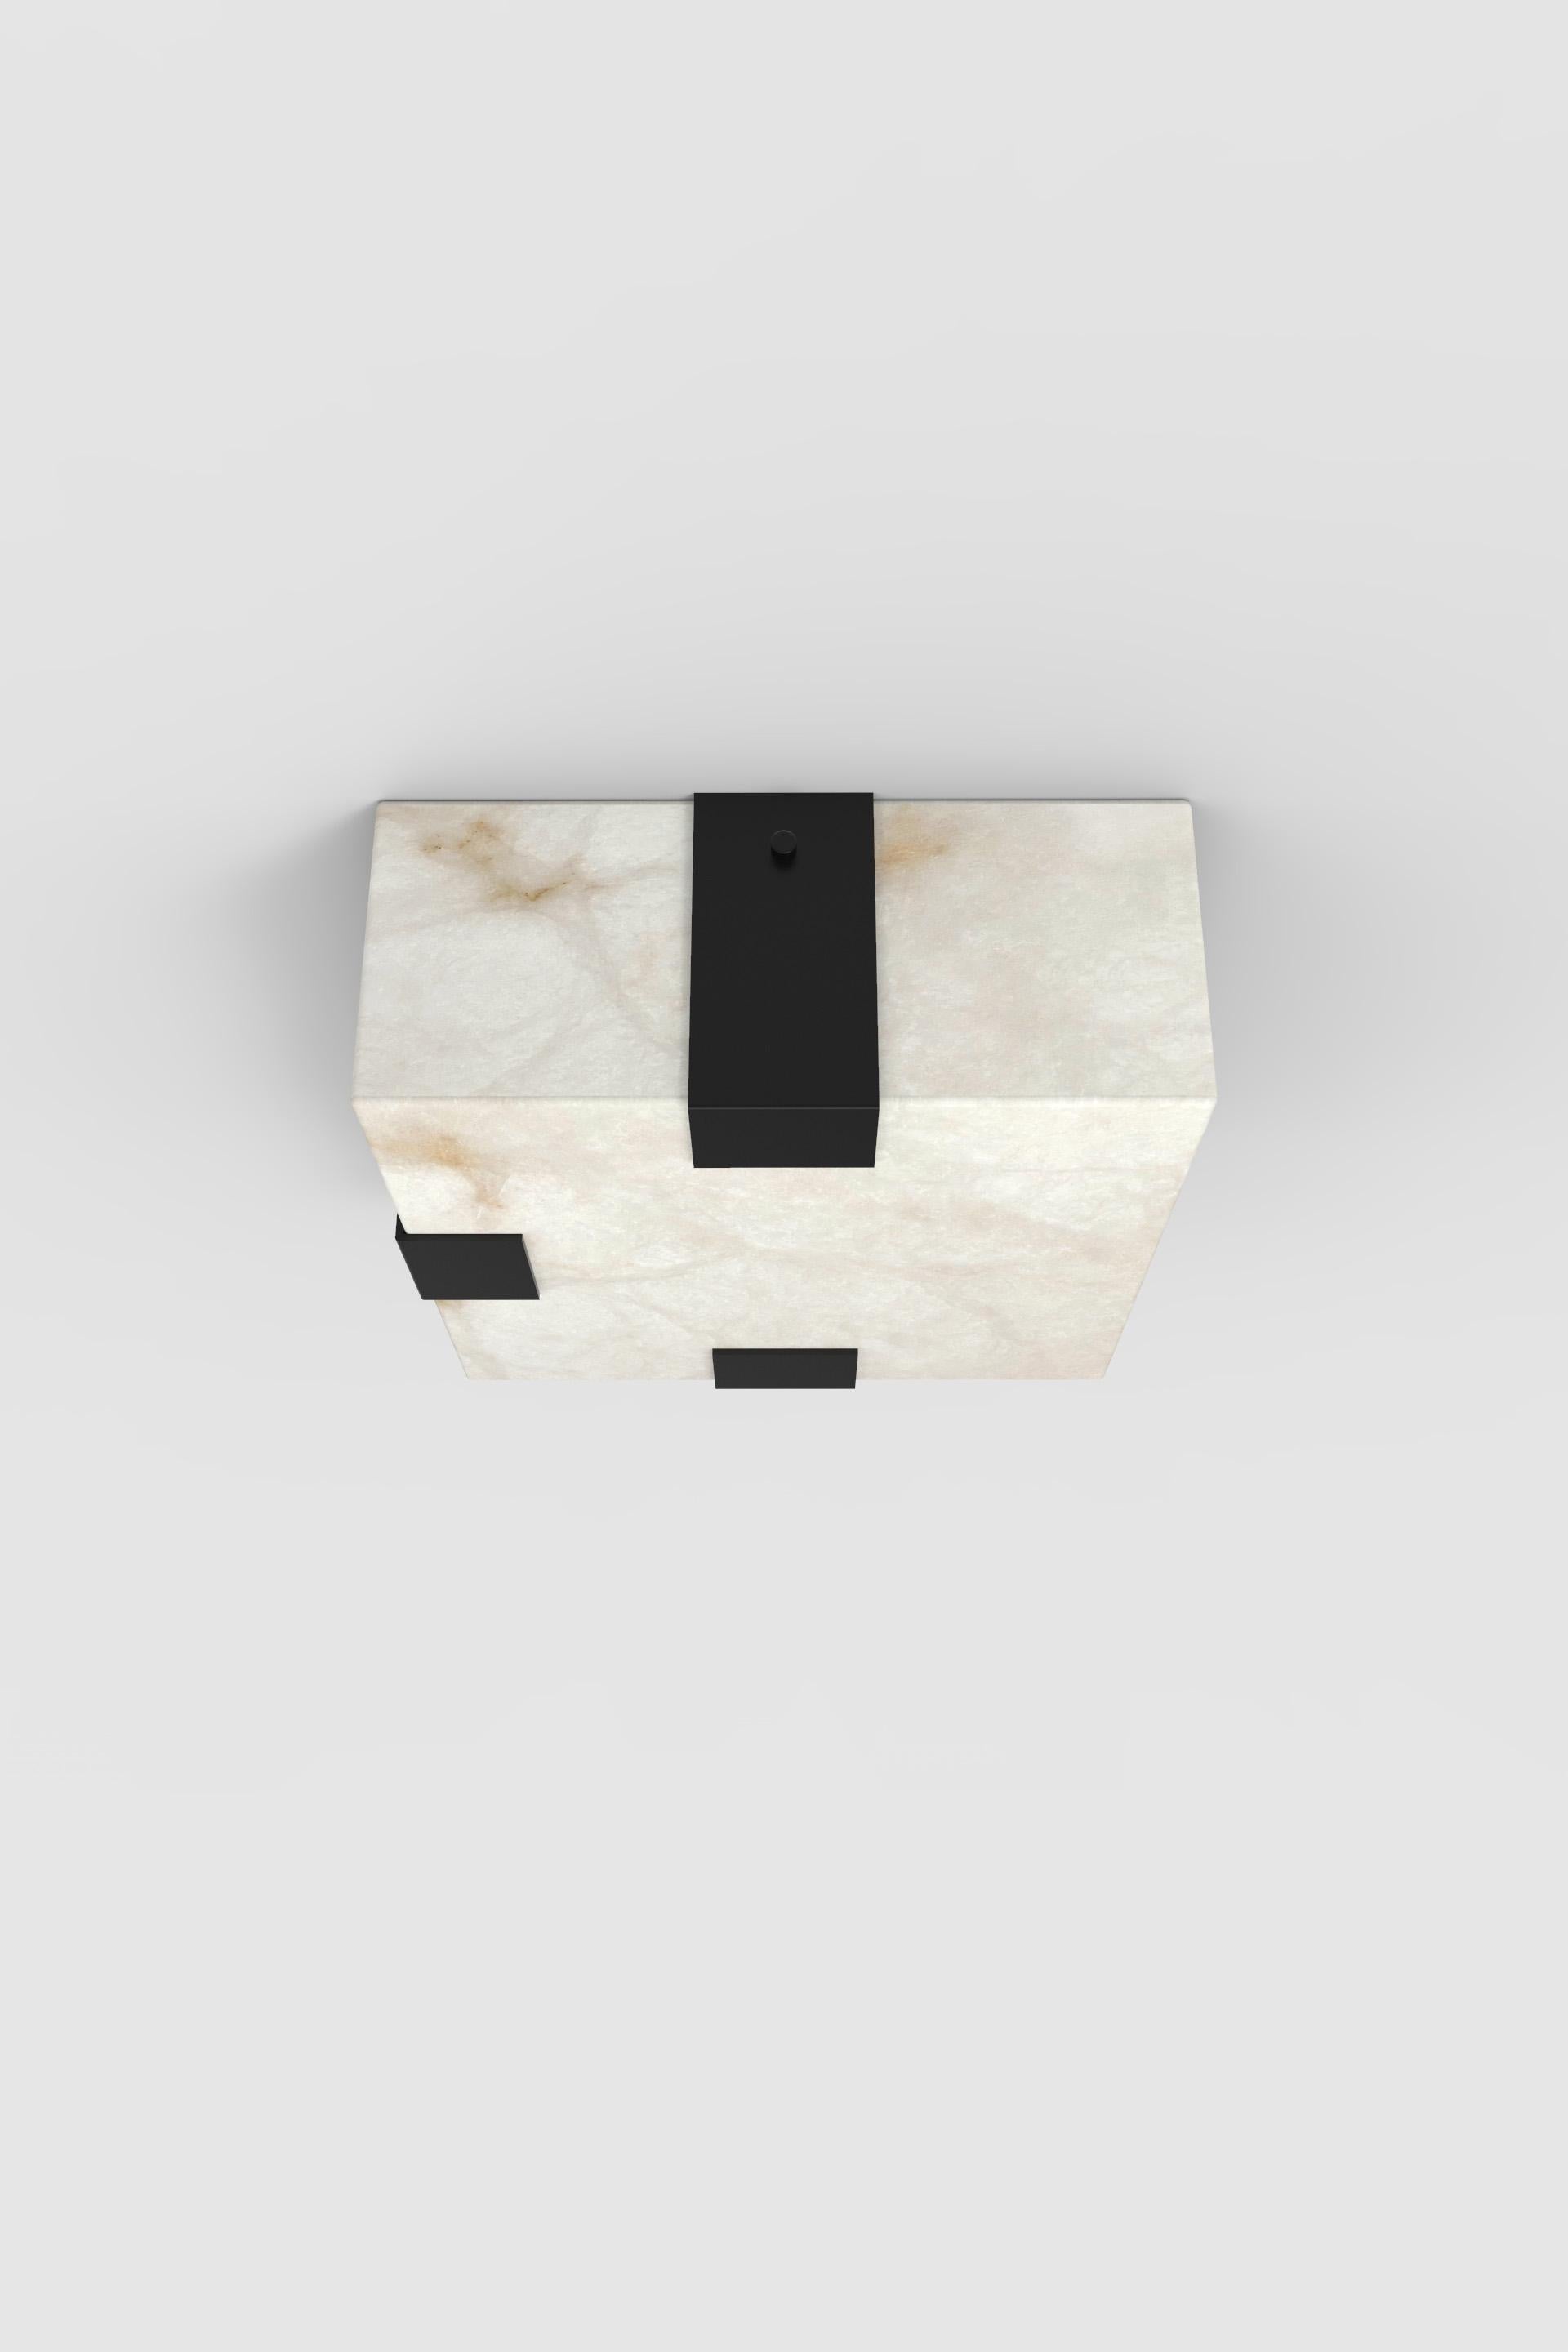 Post-Modern Contemporary Ponti Flush Mount 002A-3C in Alabaster by Orphan Work For Sale